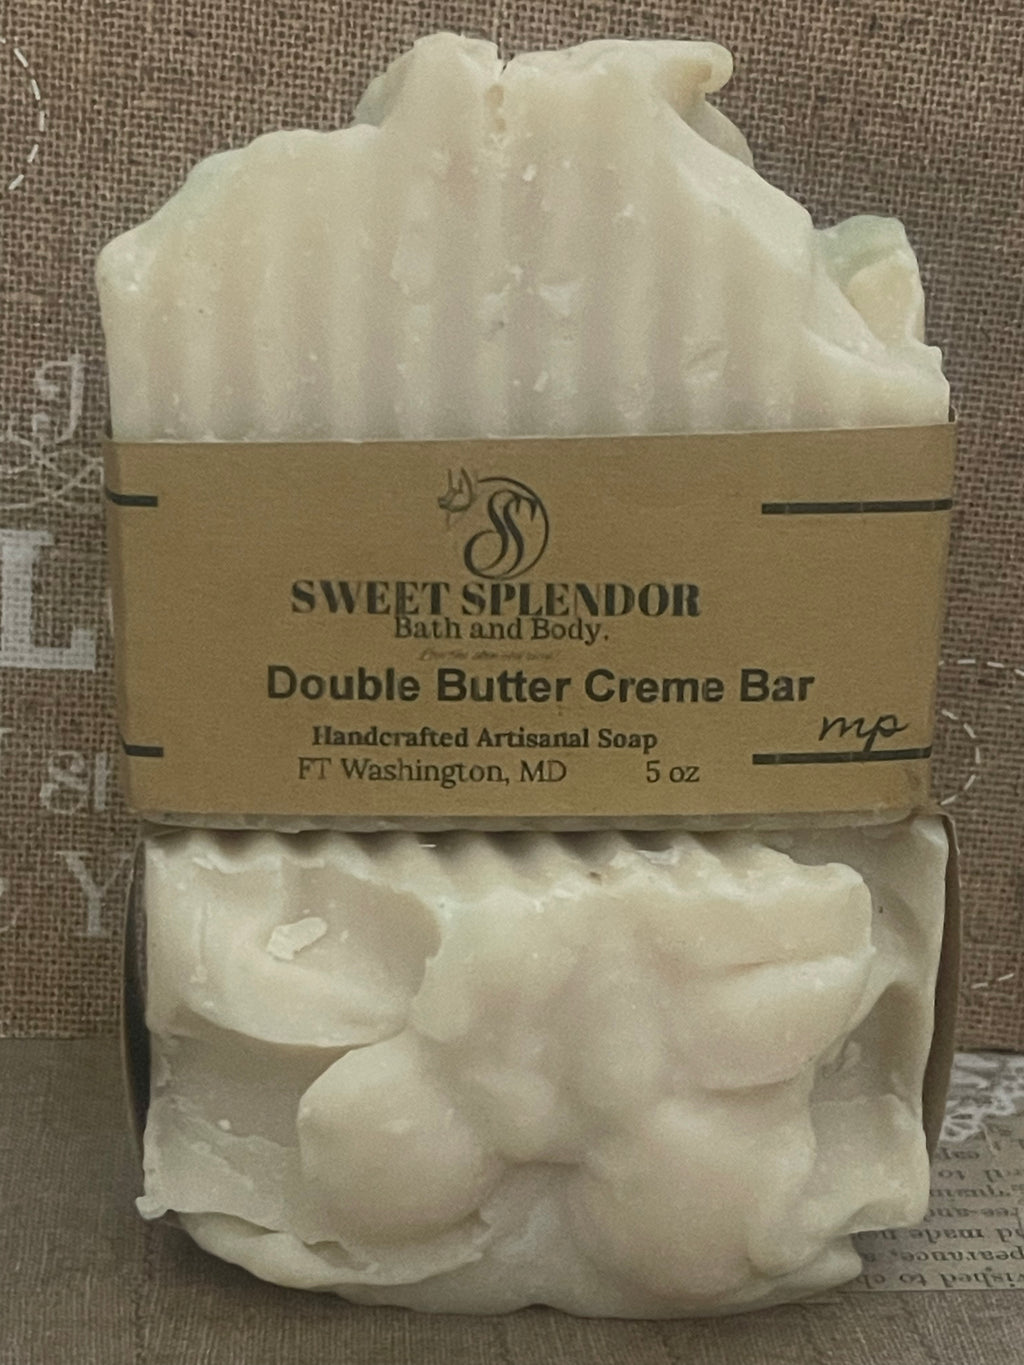 Double Butter Creme